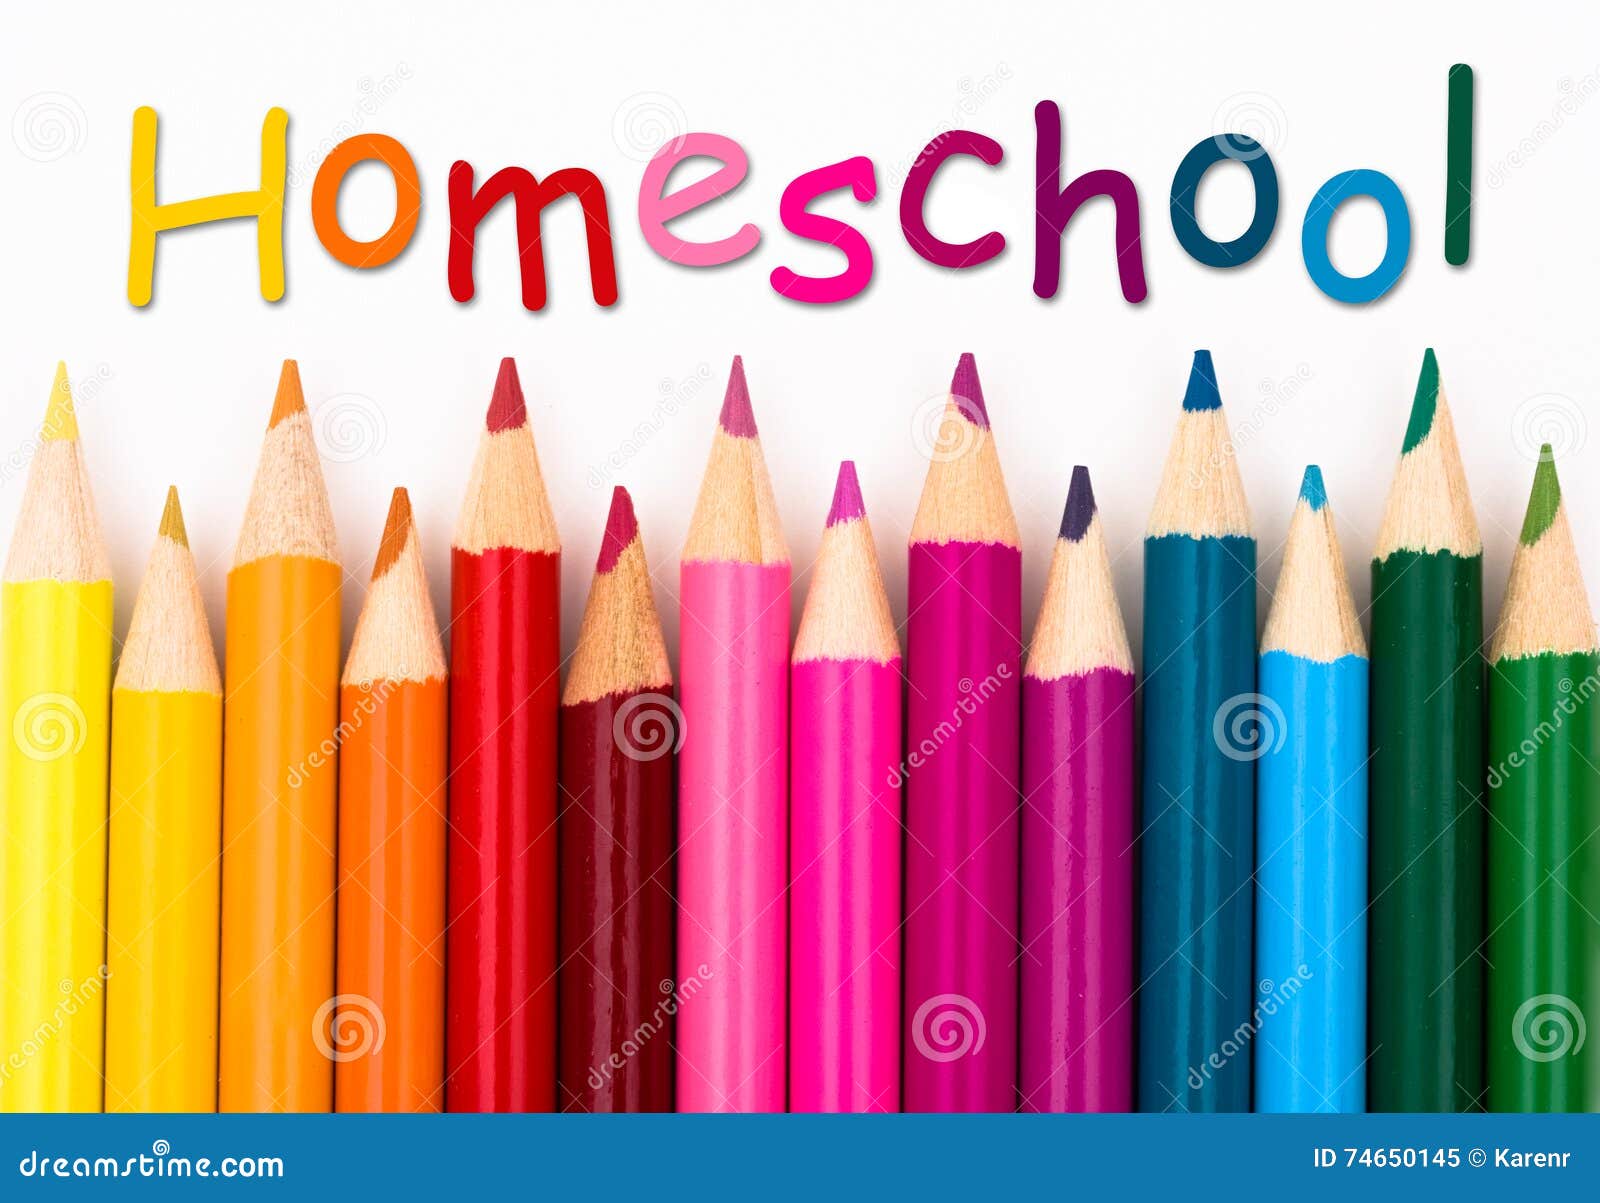 pencil crayons with text homeschool